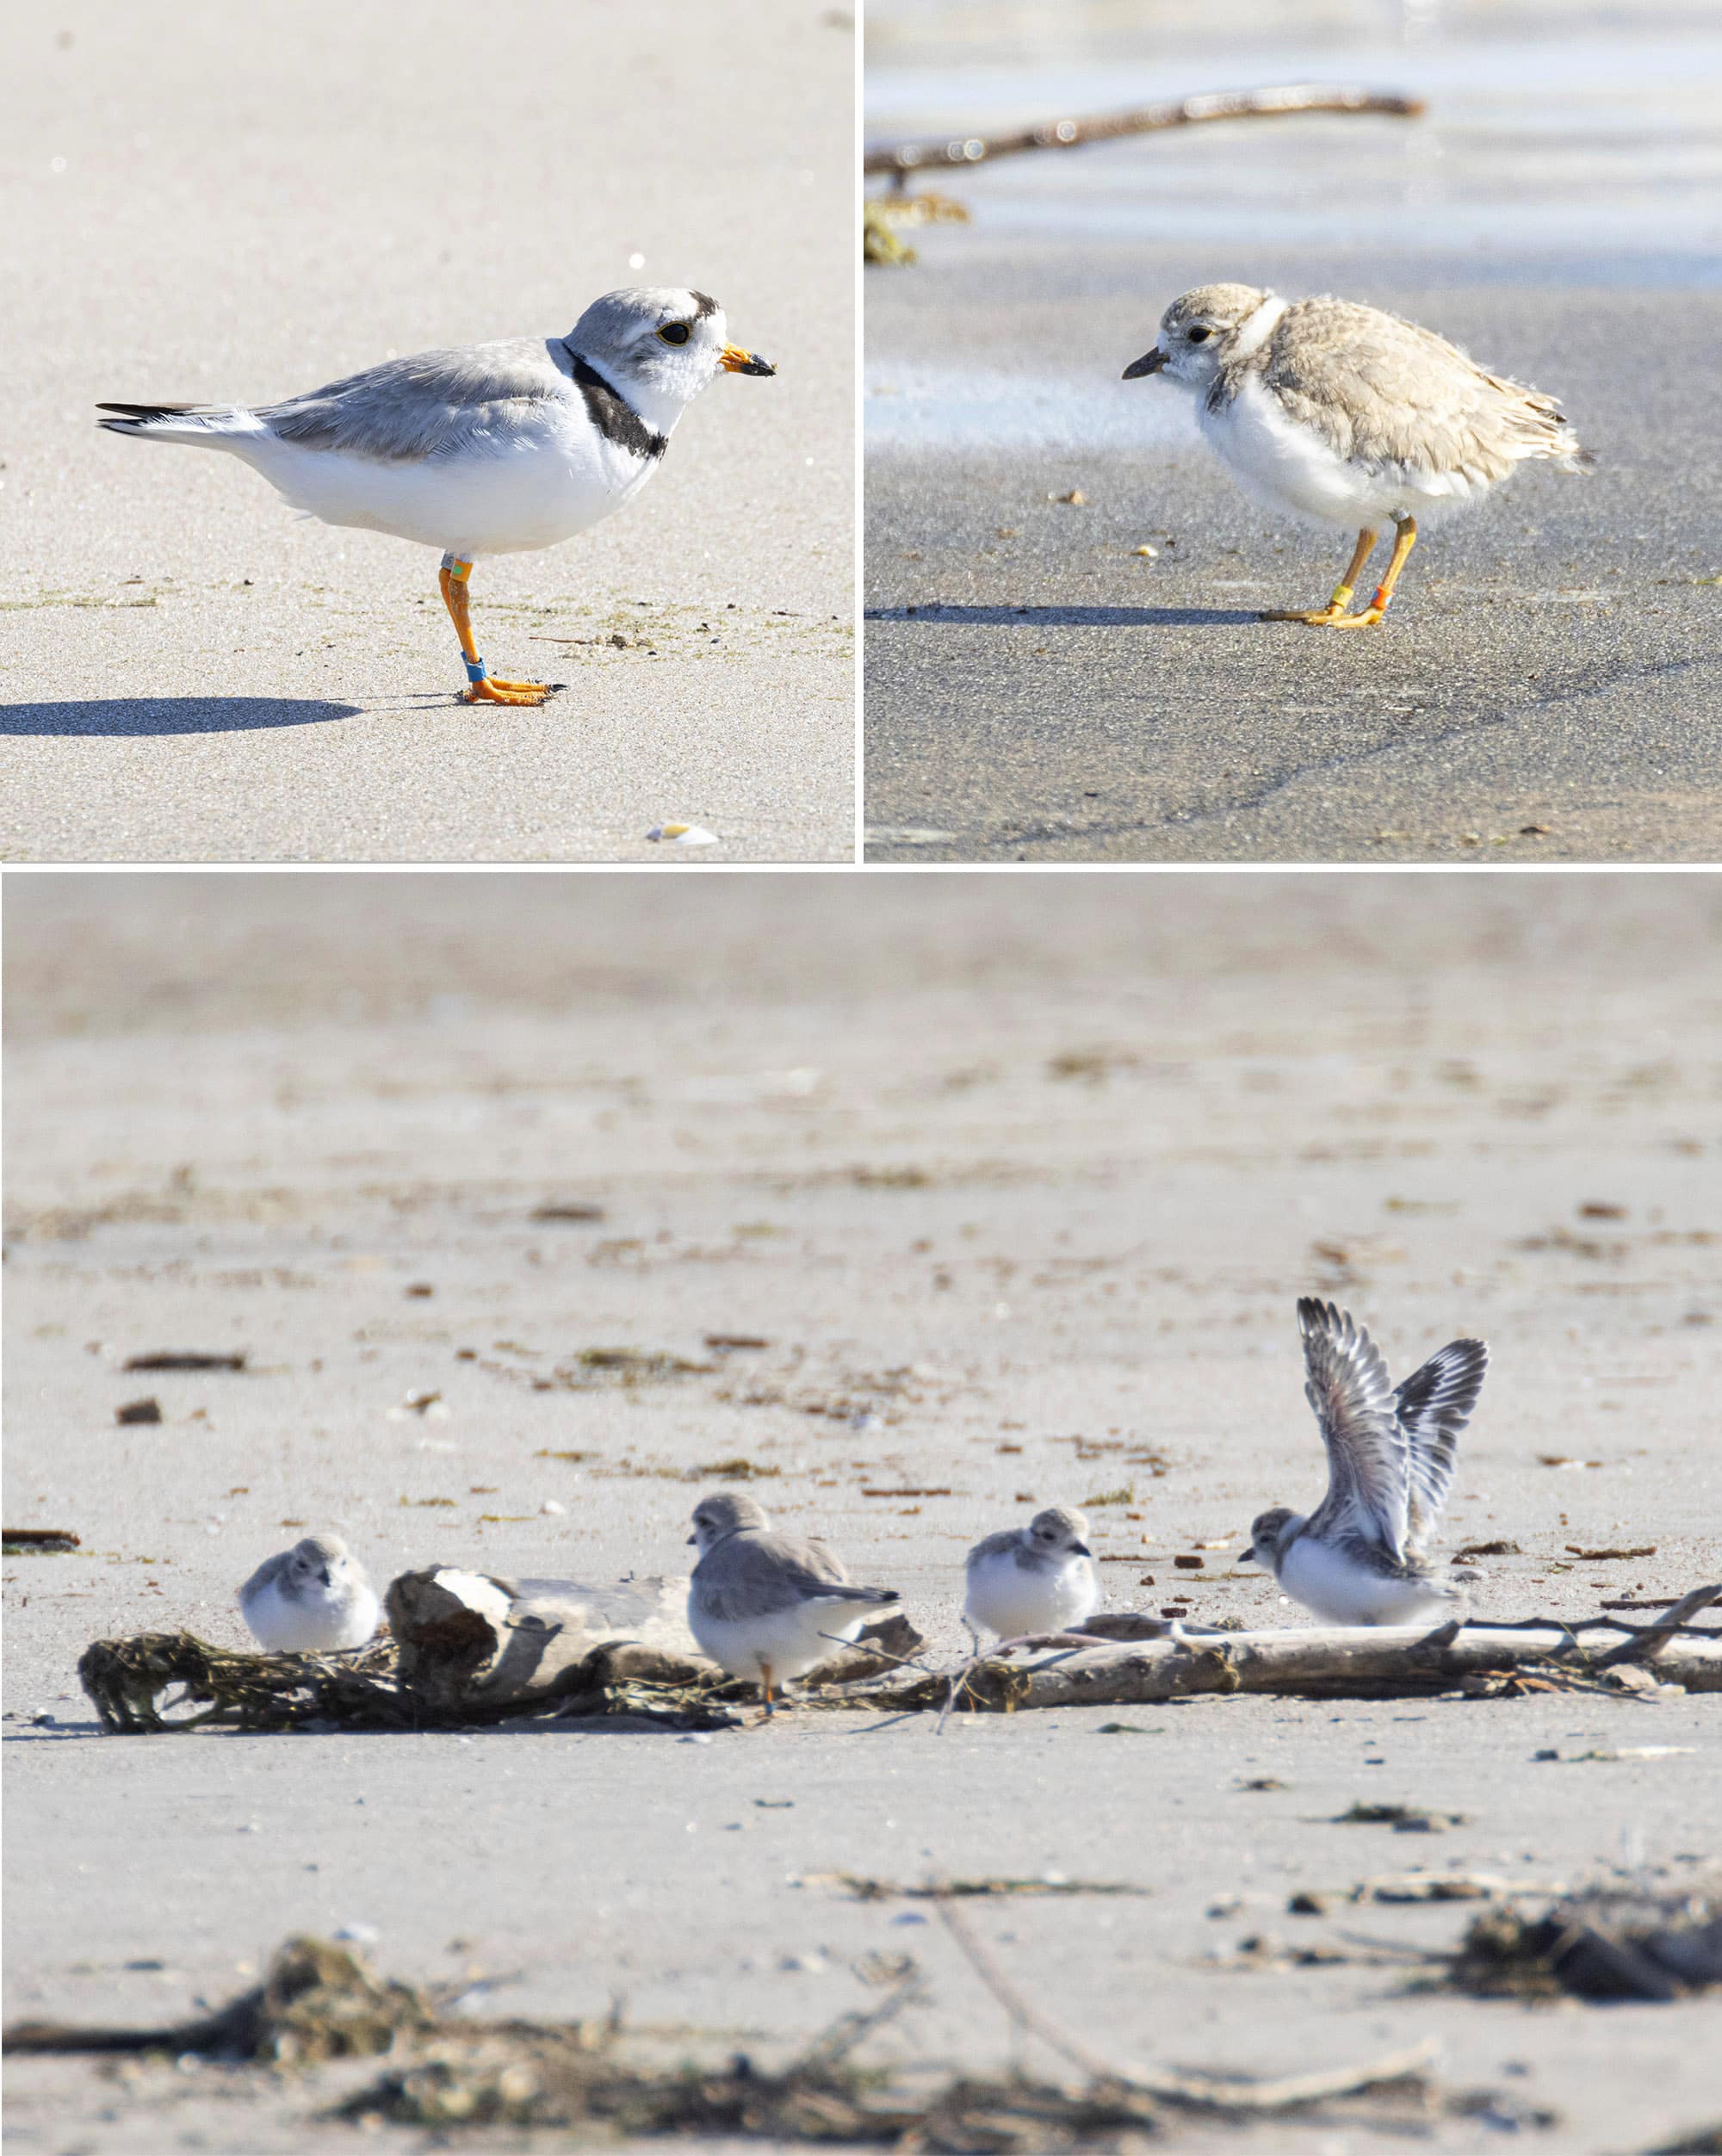 3 part image showing an adult piping plover, a baby piping plover, and a group of baby piping plovers on the beach.